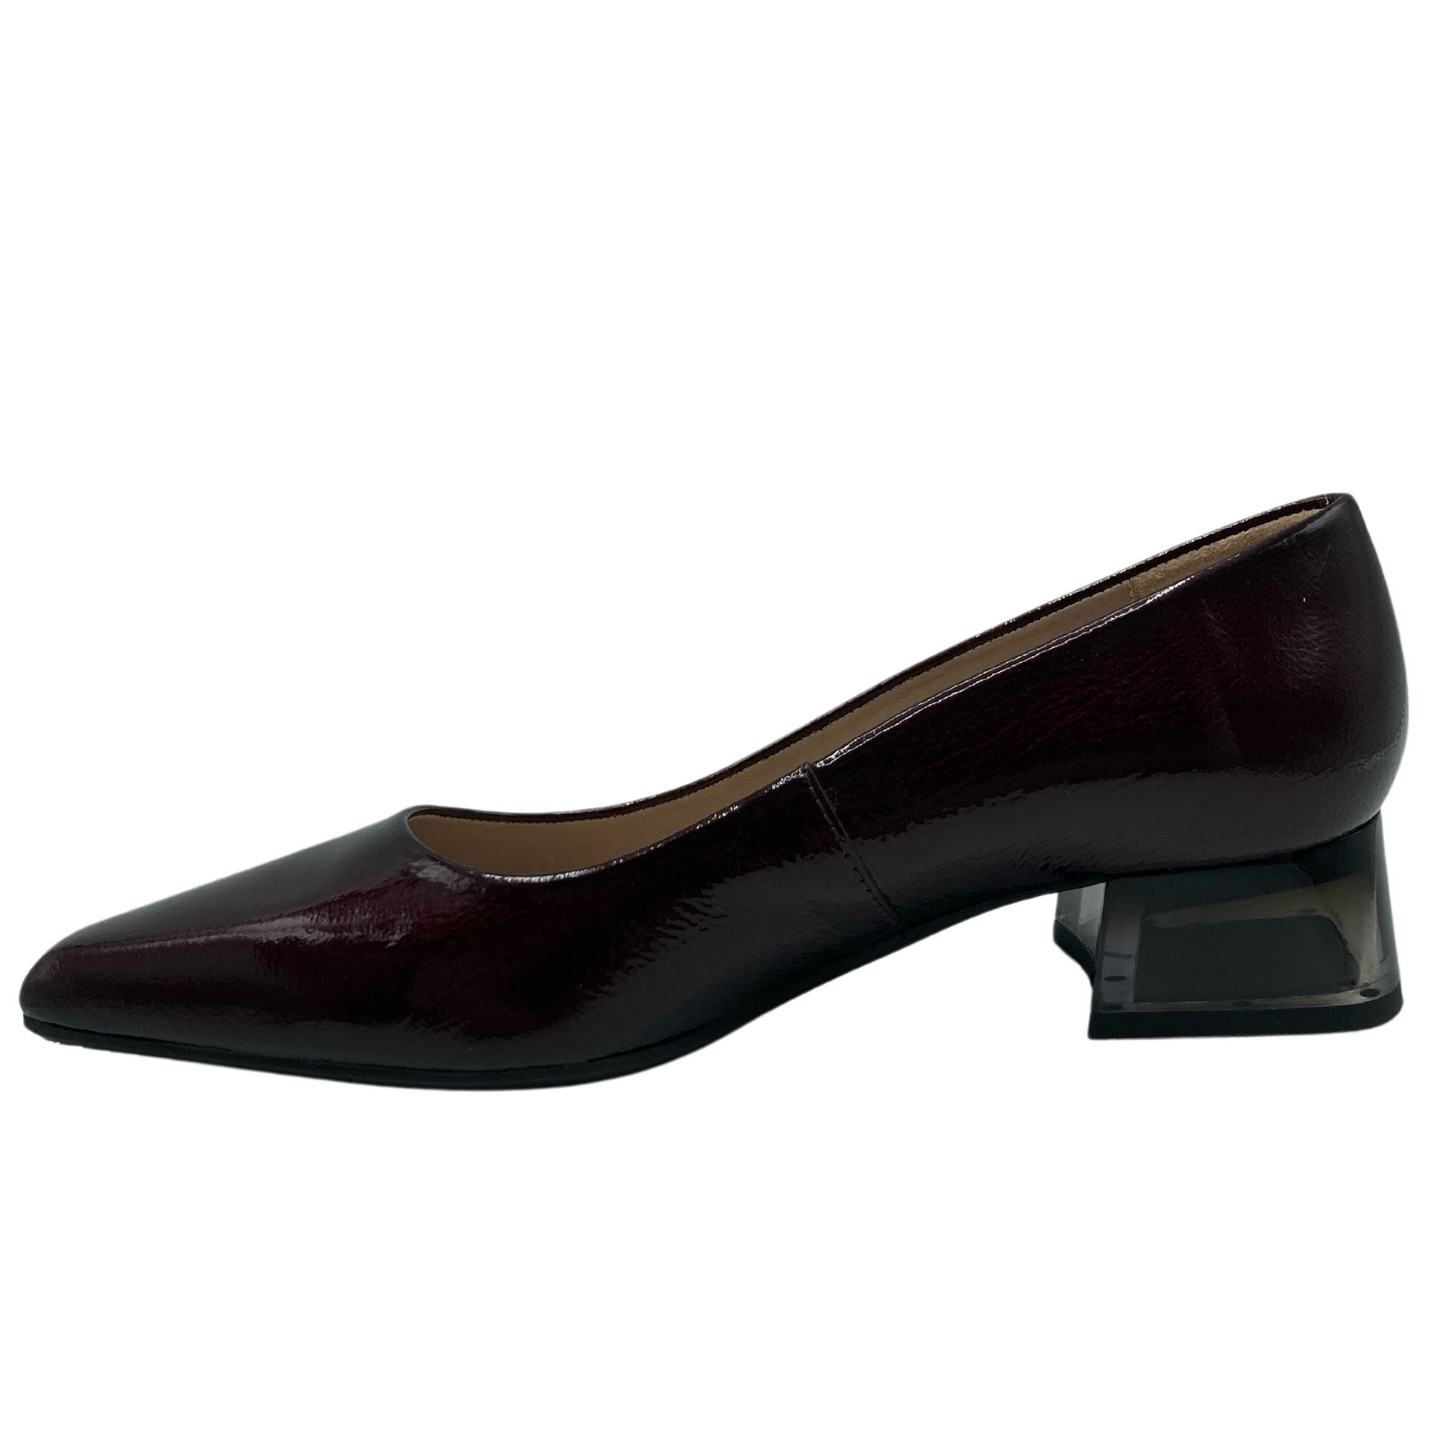 Left facing view of wine patent leather pointed toe pump with block heel